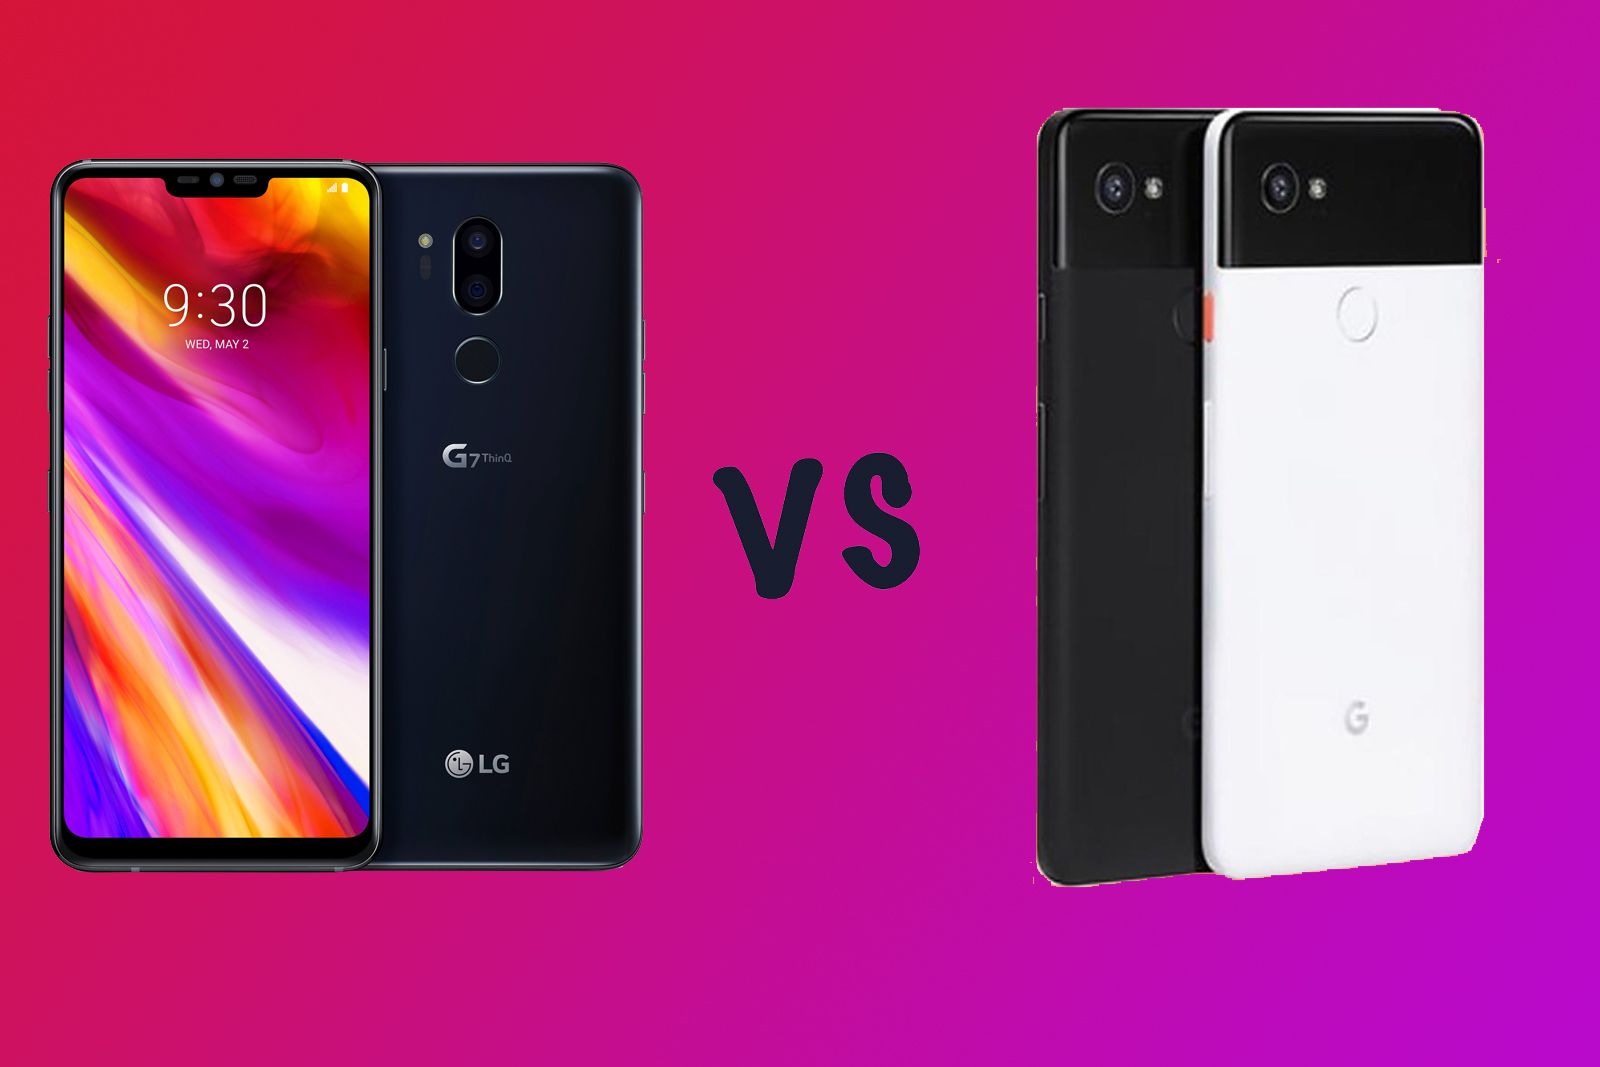 LG G7 ThinQ vs Google Pixel 2 XL Whats the difference image 1